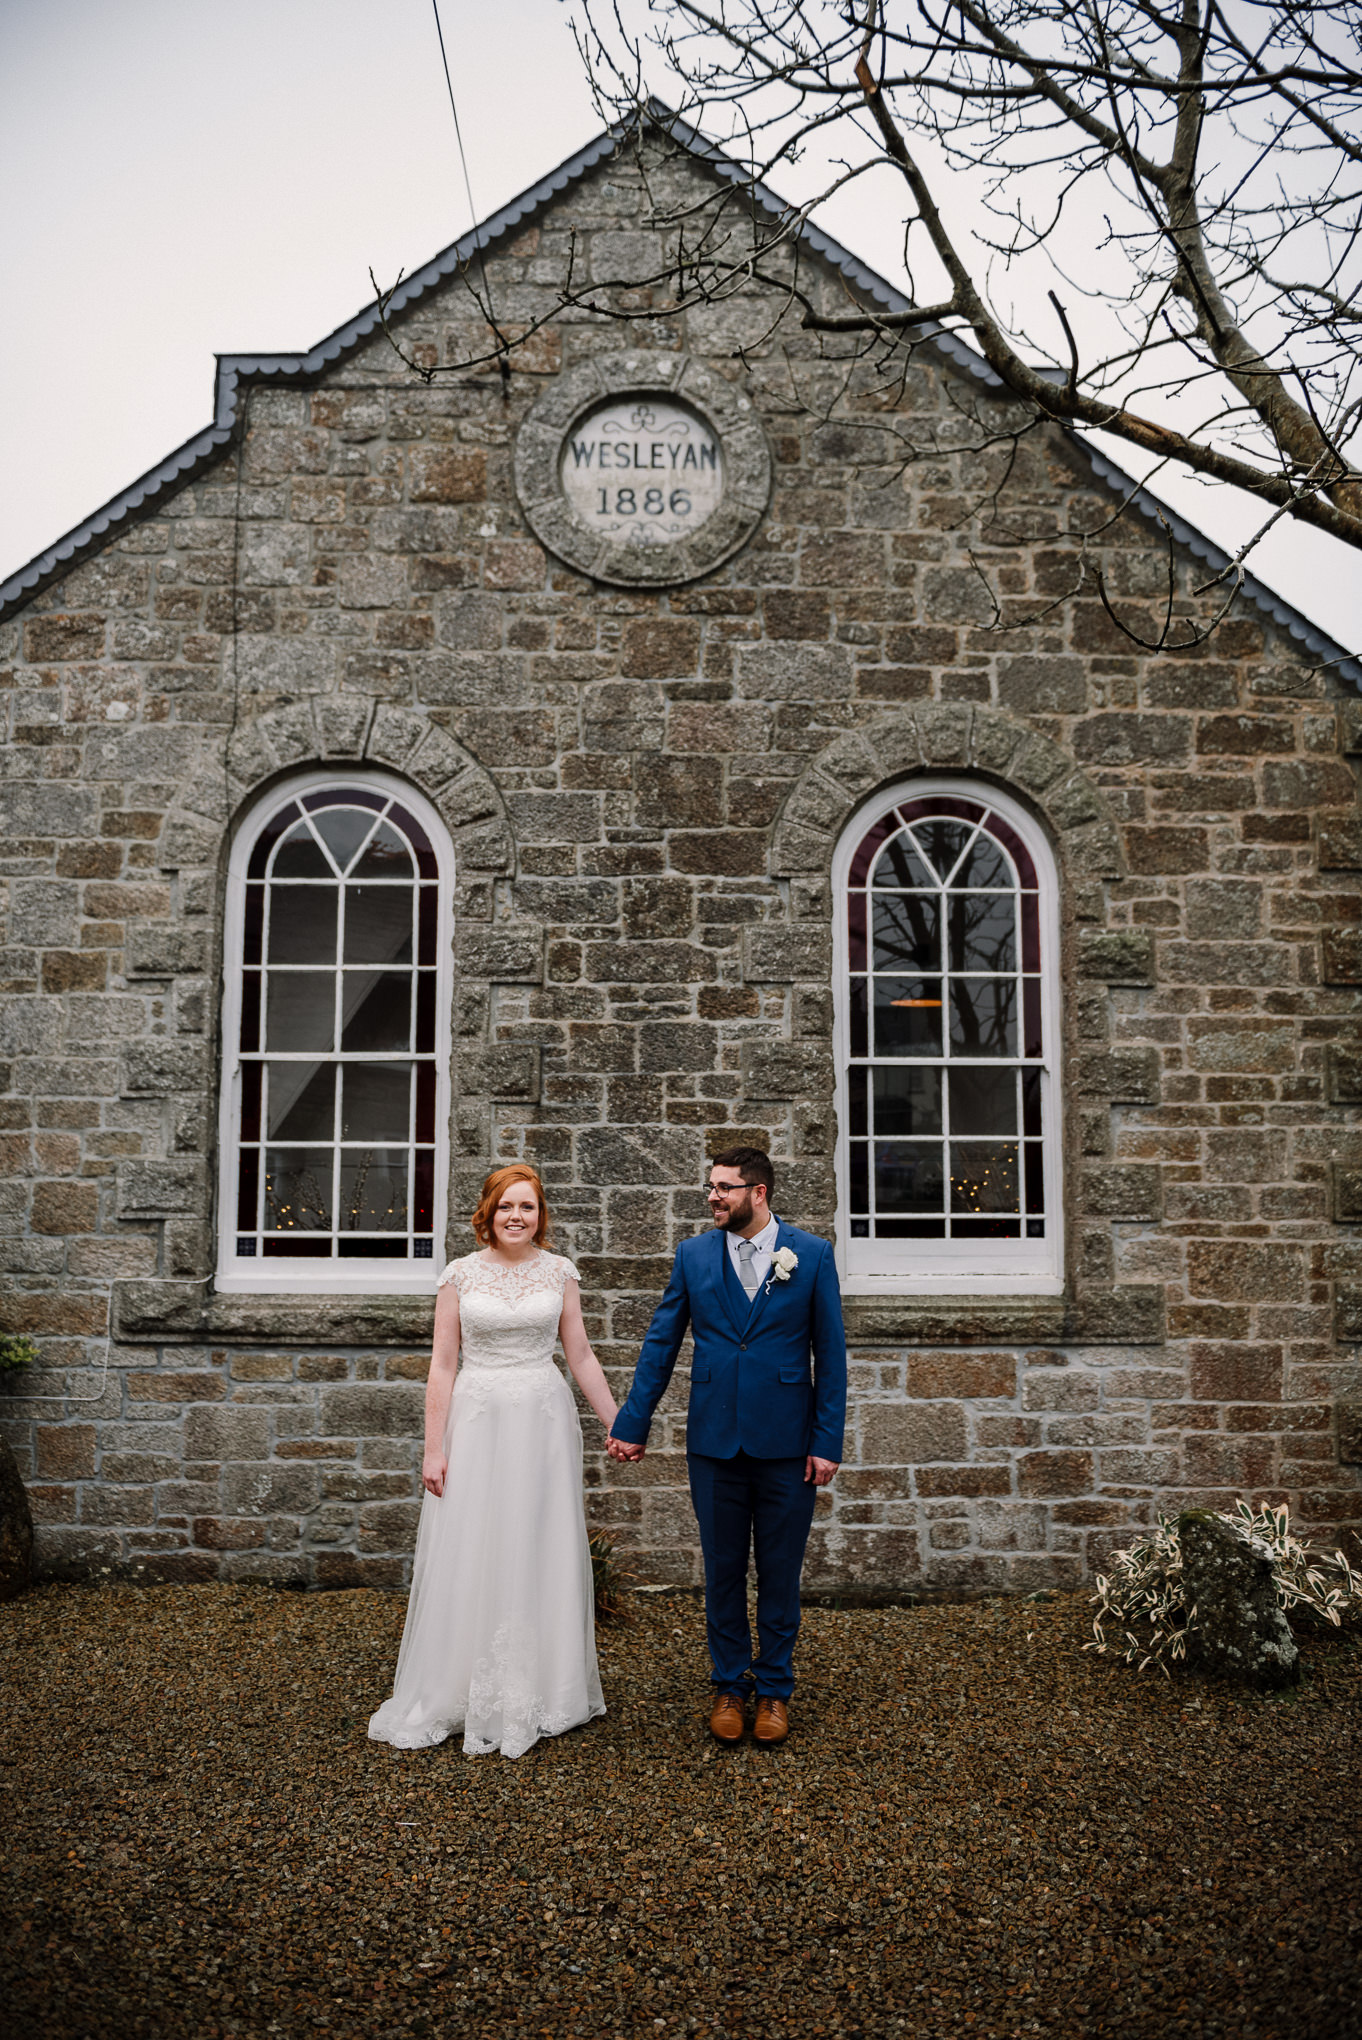 Bride and groom stood together outside the Dreamcatcher Wedding Venue in Cornwall. Elopement wedding photography.